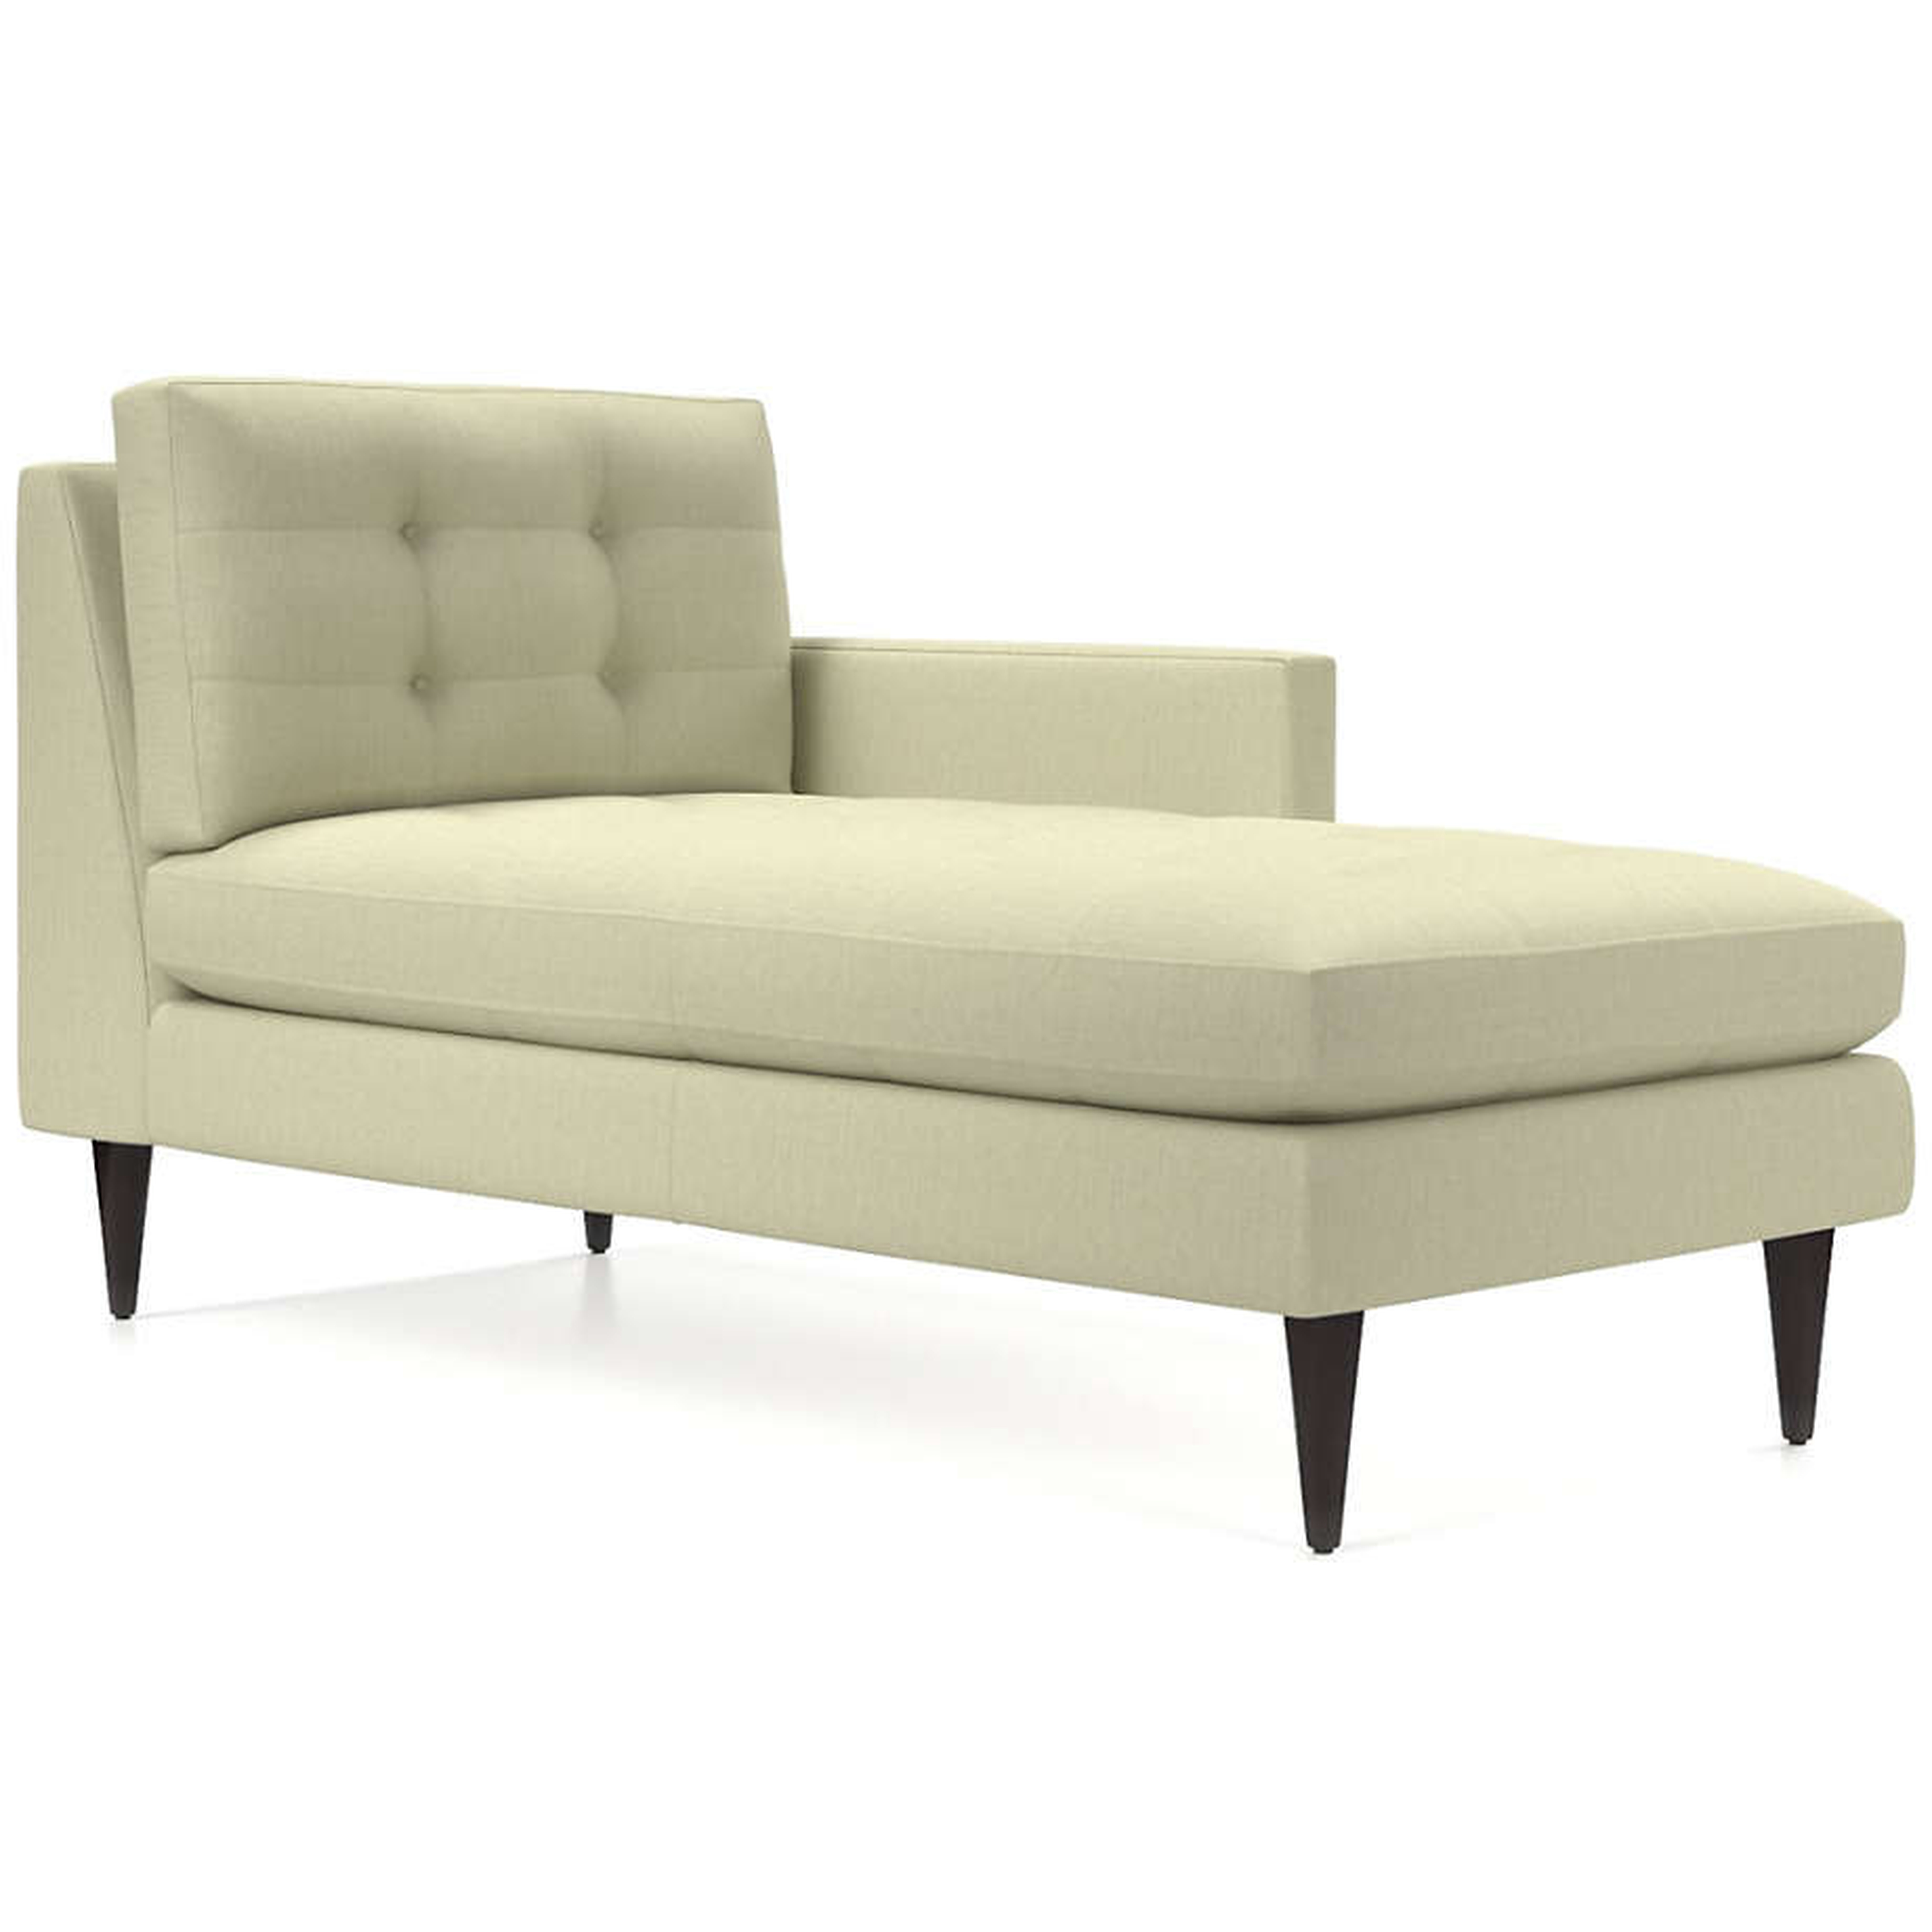 Petrie Right Arm Midcentury Chaise Lounge - Crate and Barrel